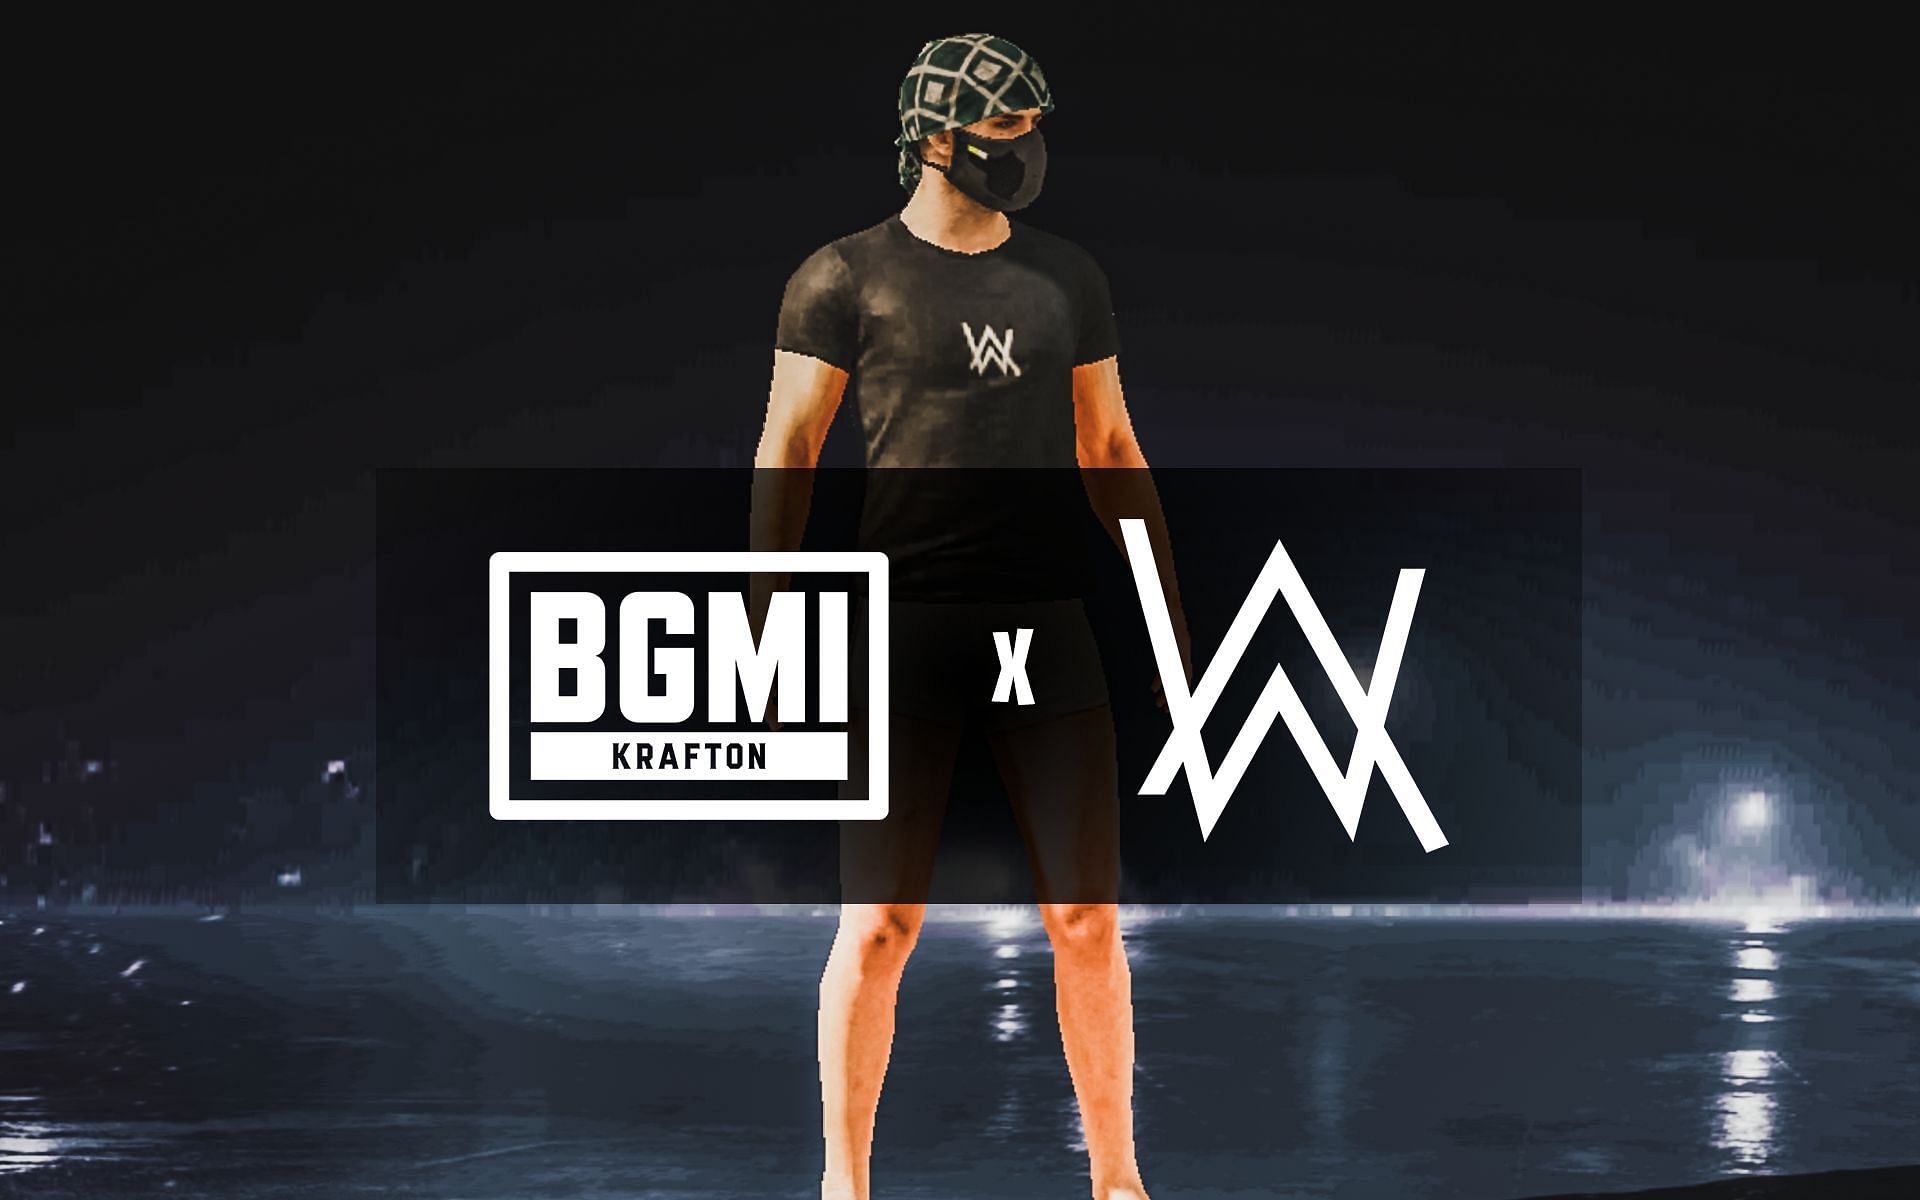 Alan Walker collaboration outfits have been added to BGMI (Image via Sportskeeda)